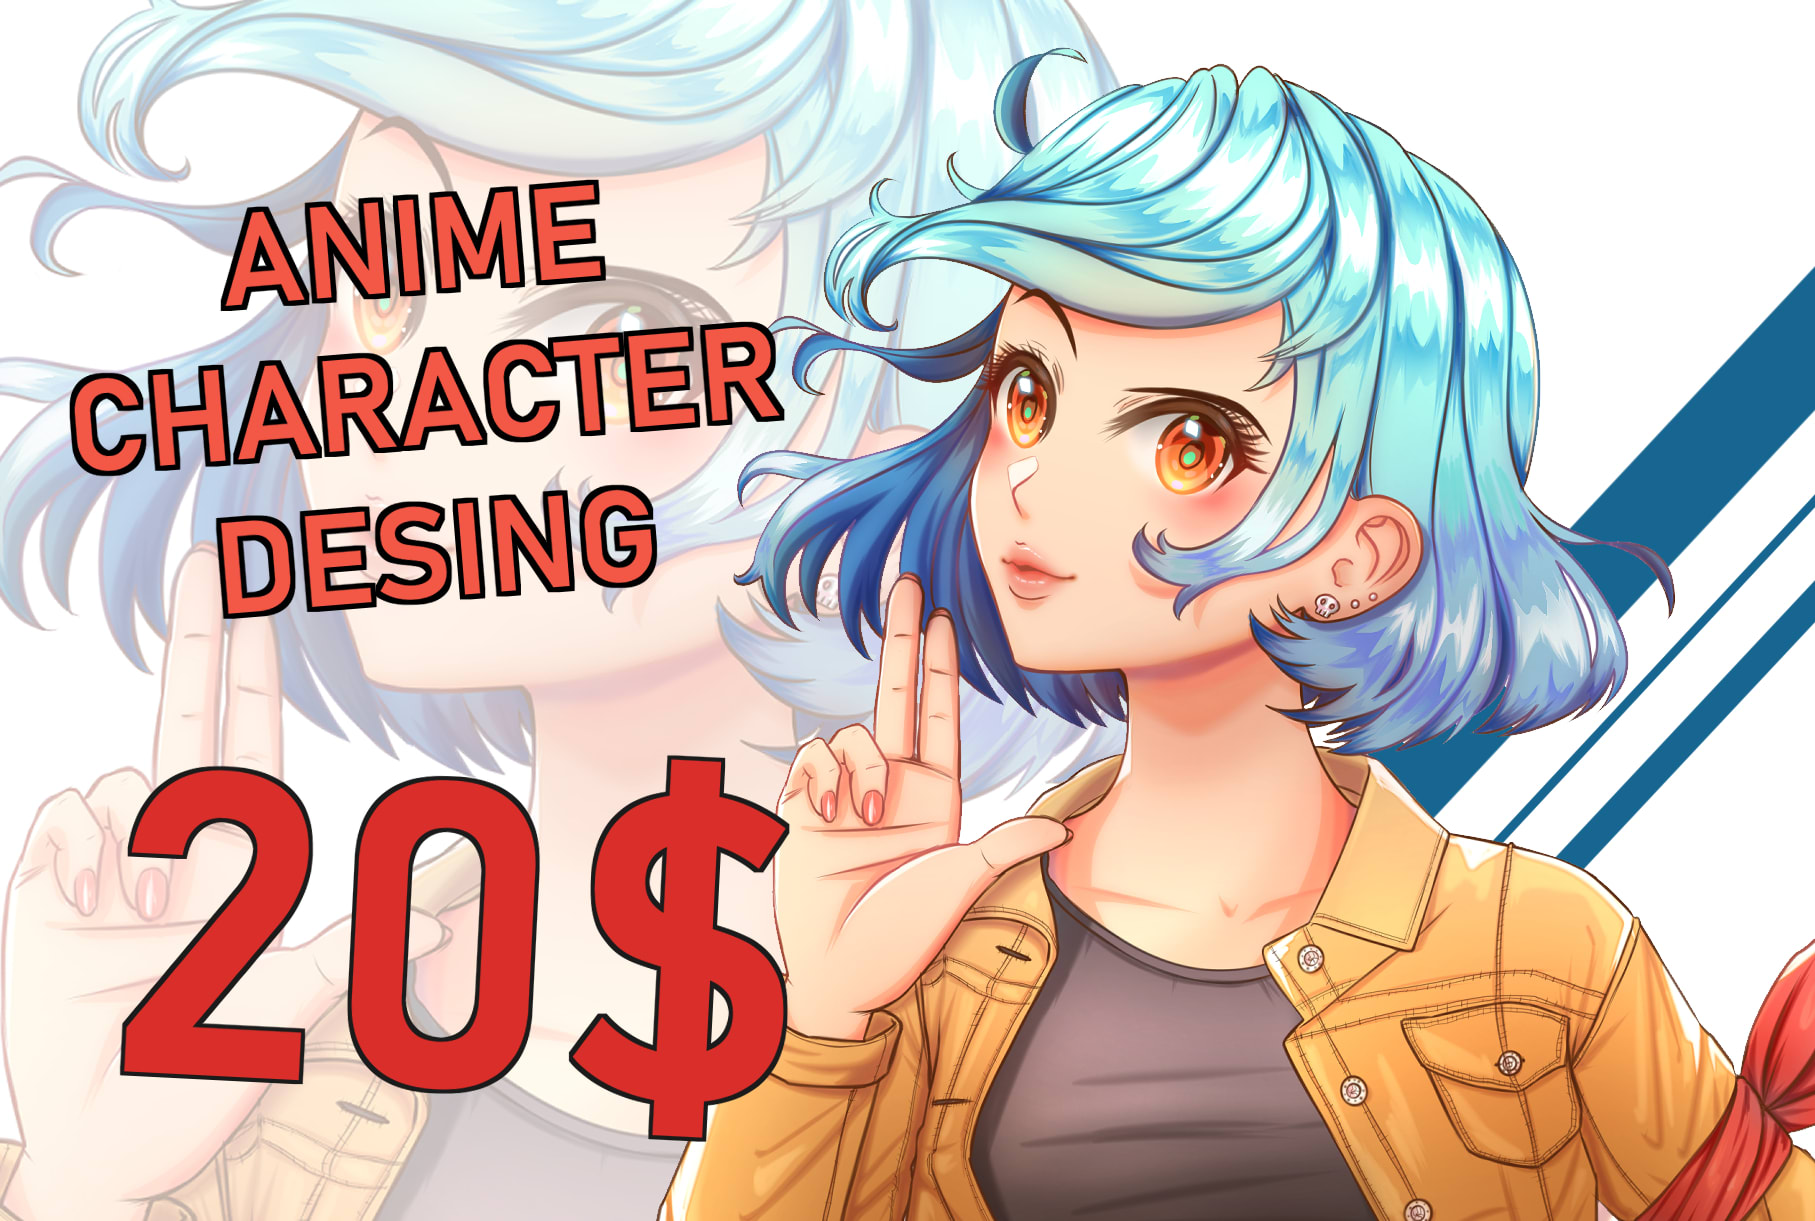 turn yourself into an anime character photoshop